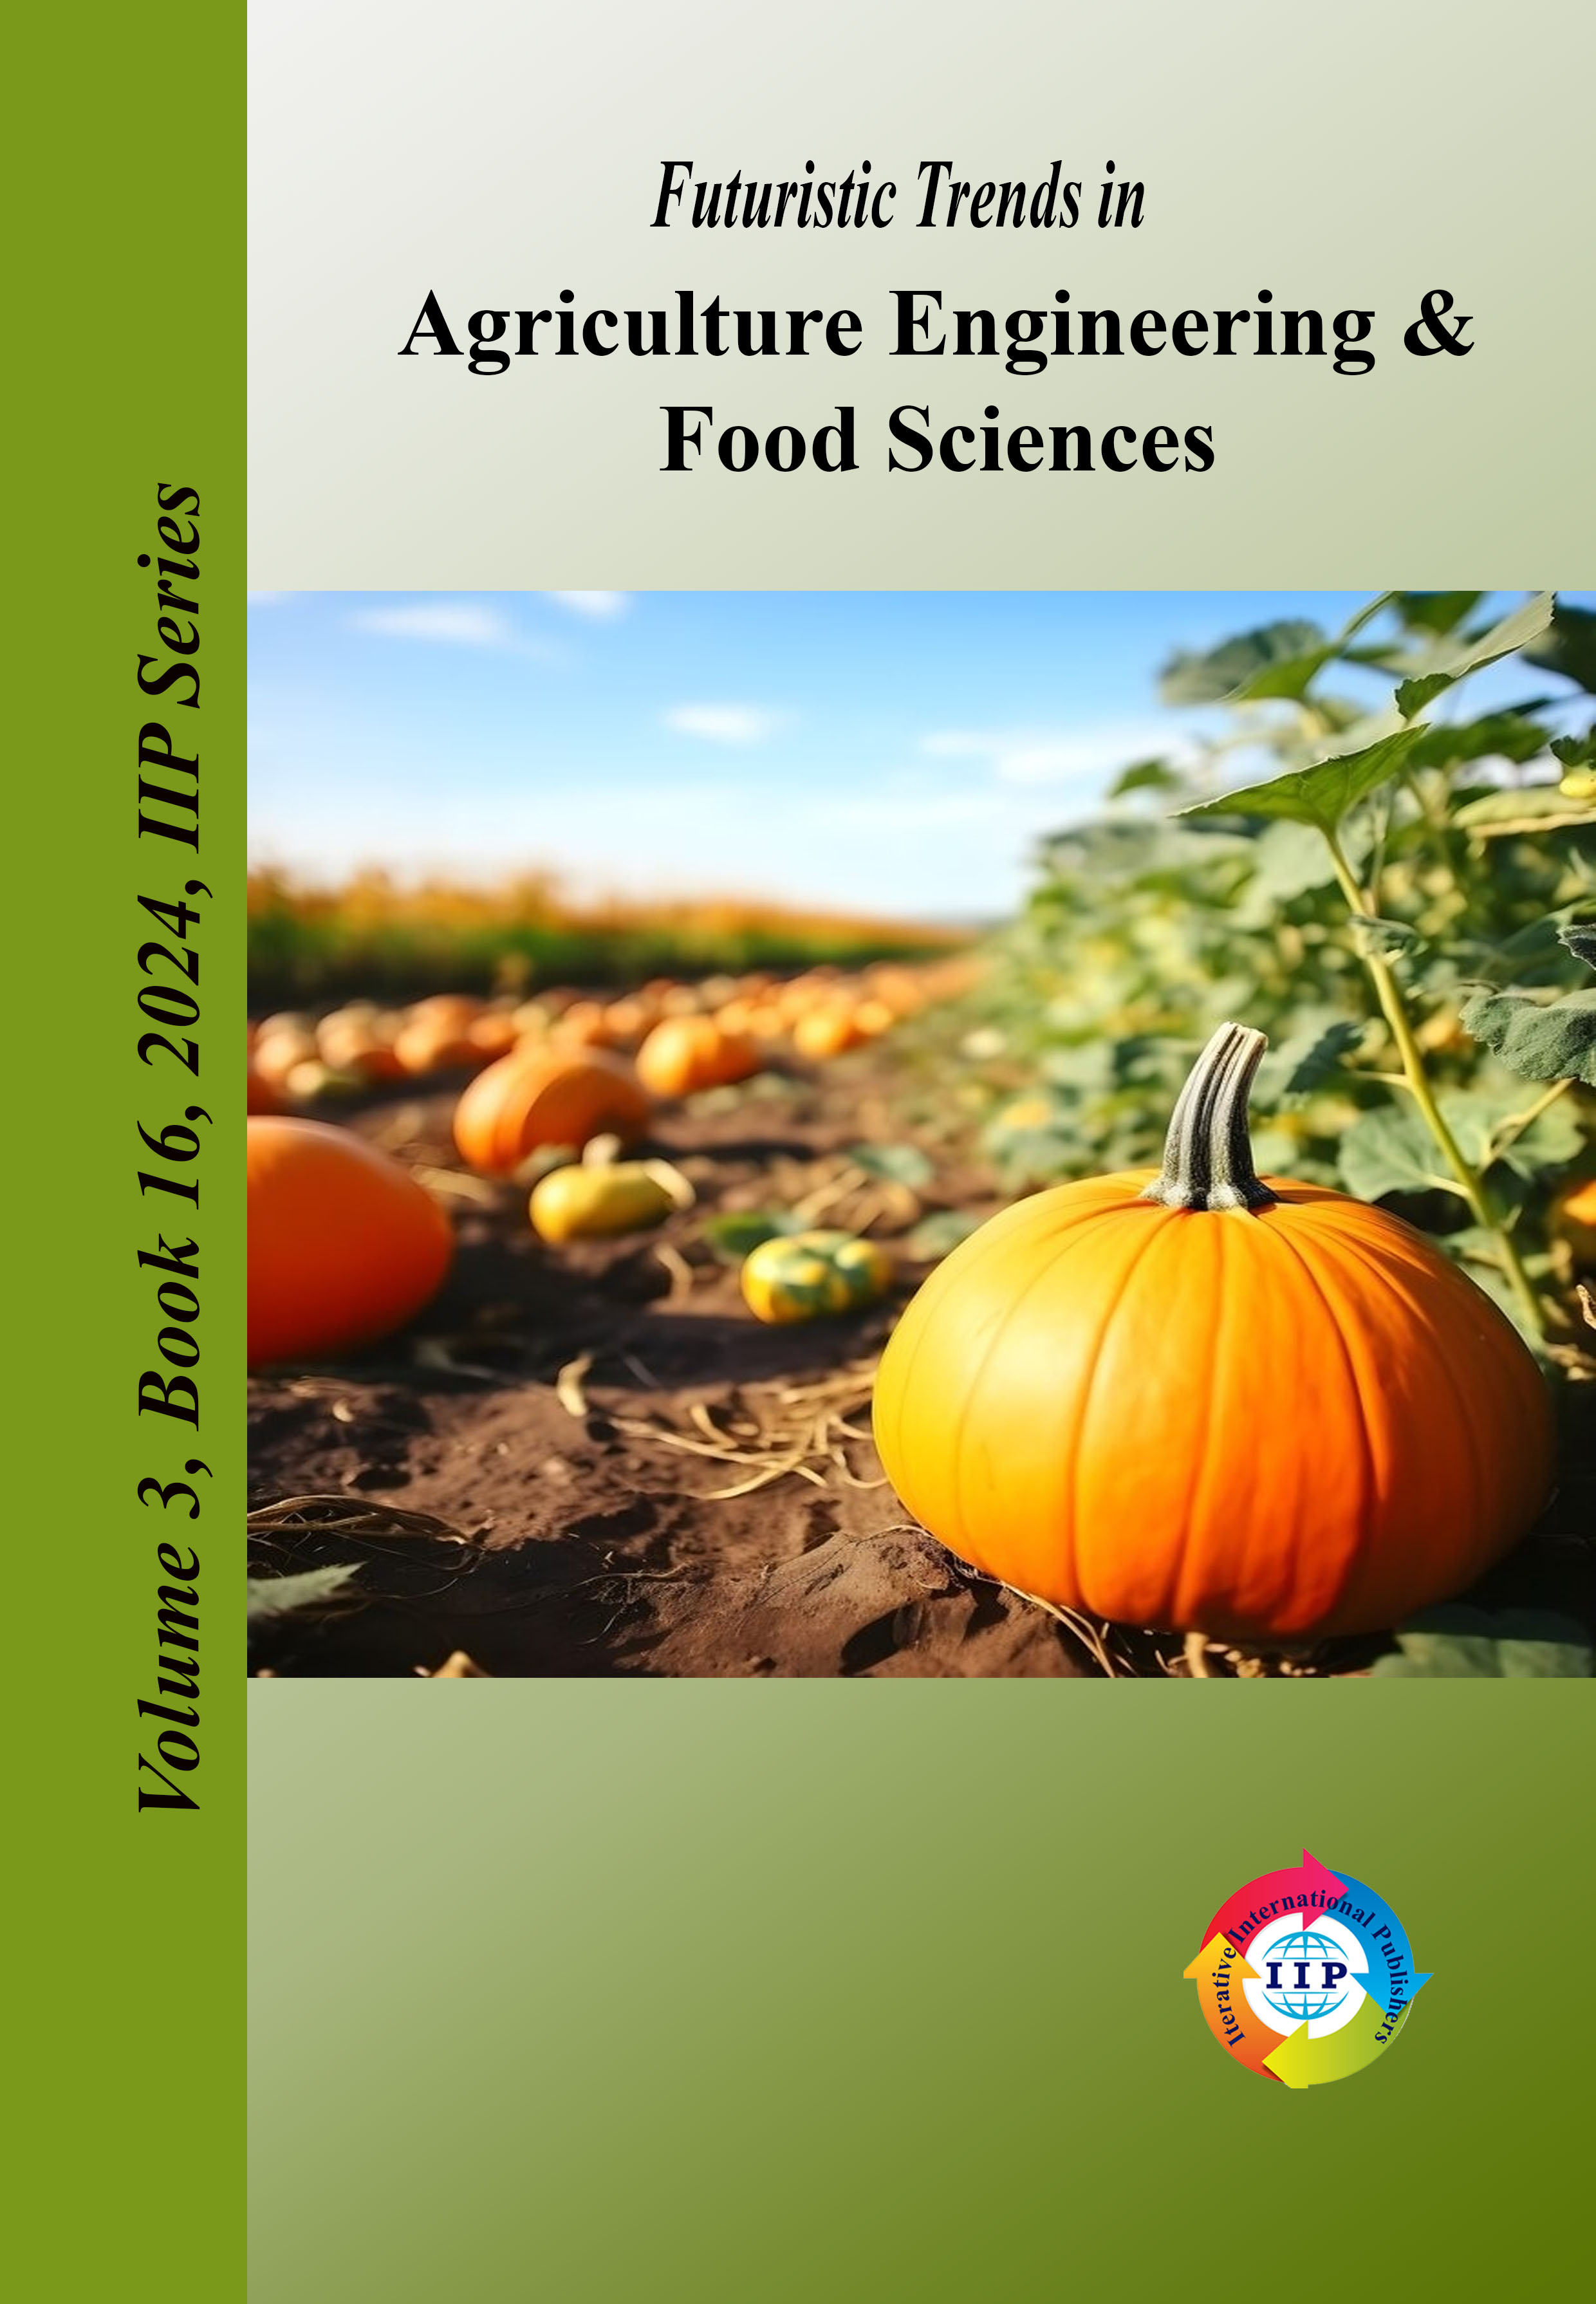 Futuristic Trends in Agriculture Engineering & Food Sciences Volume 3 Book 16